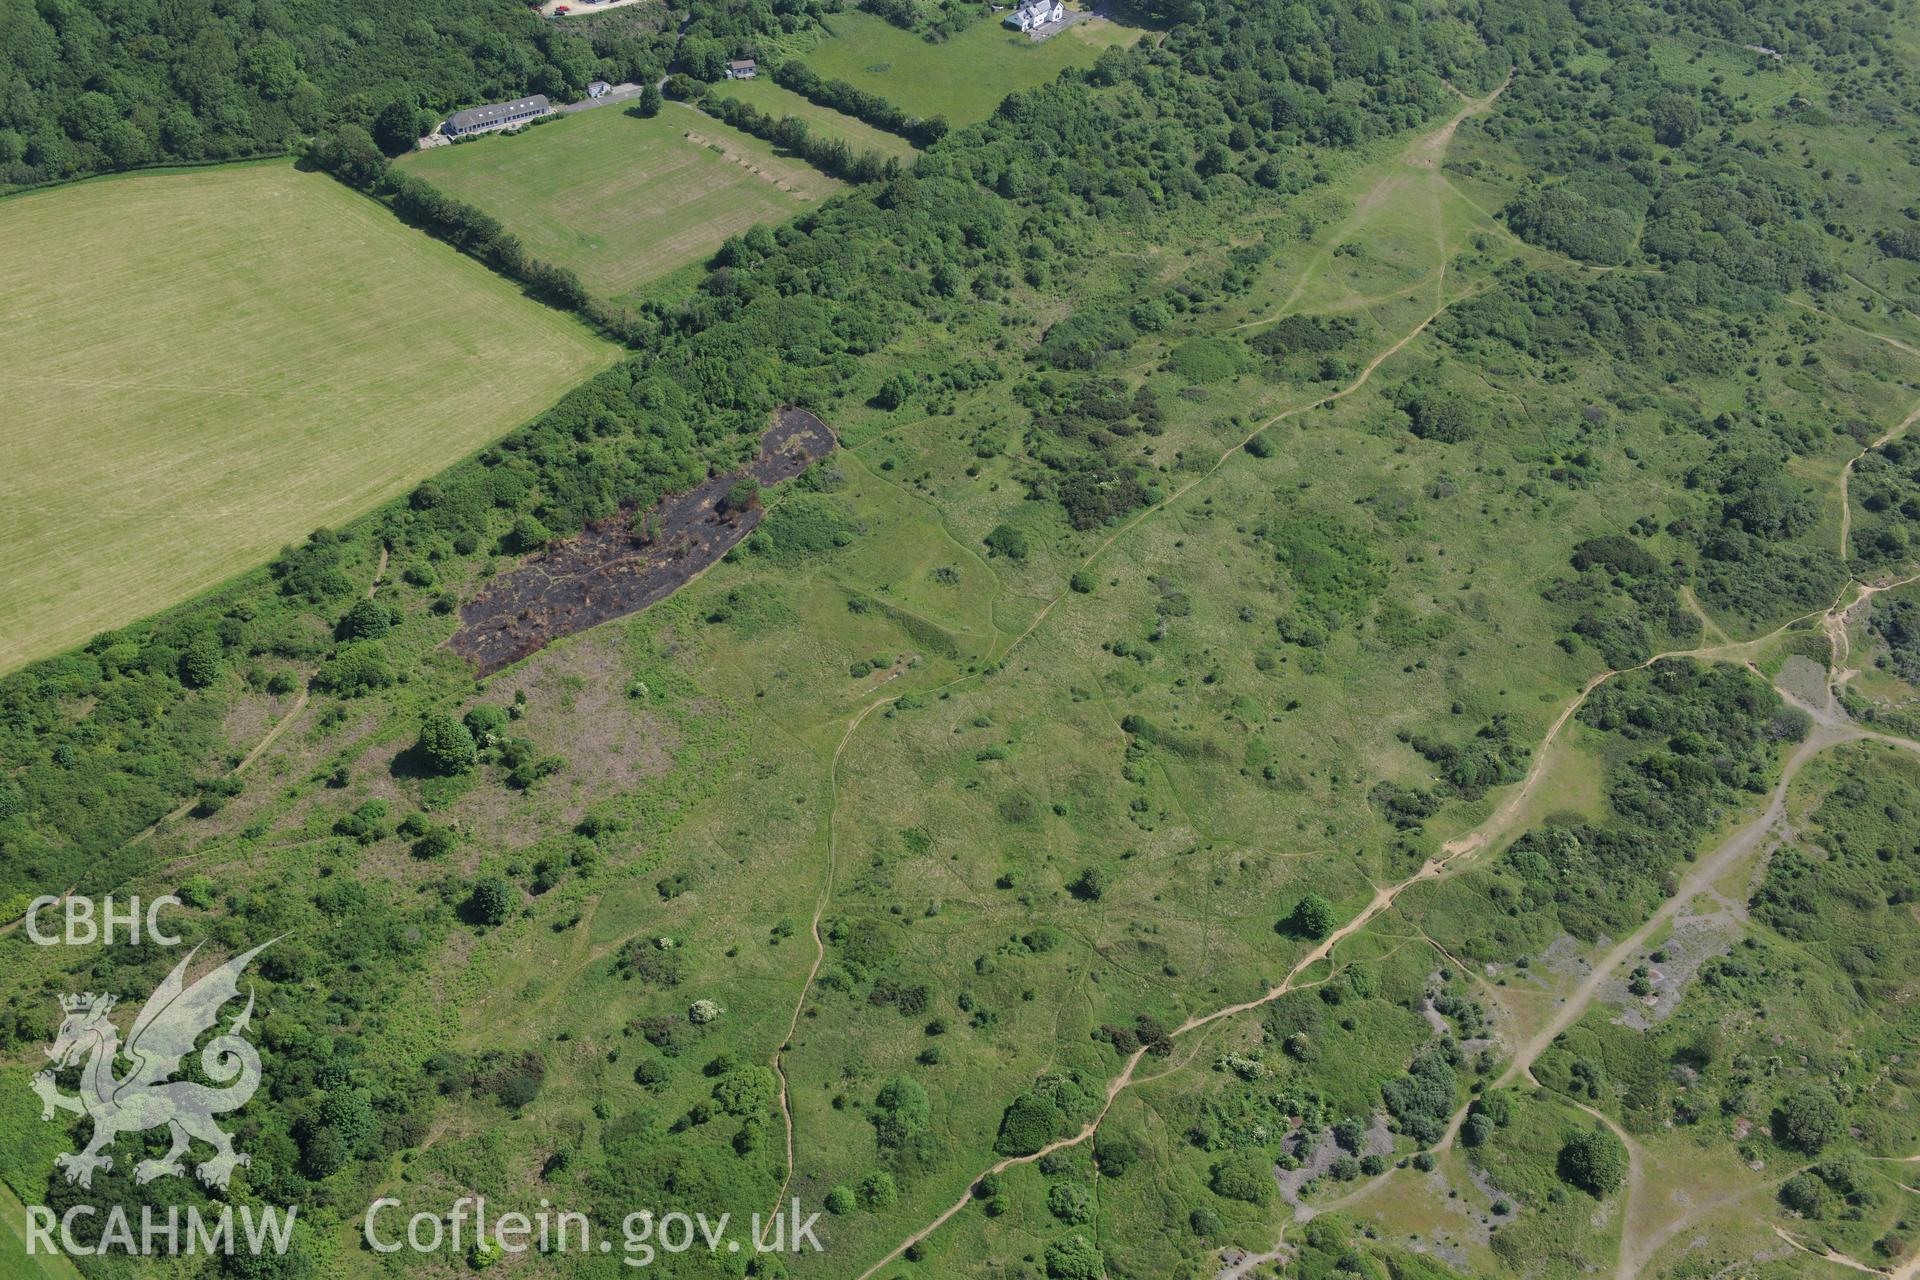 Merthyr Mawr warren and the Wig Fach Rifle Range 2, target area. Oblique aerial photograph taken during the Royal Commission's programme of archaeological aerial reconnaissance by Toby Driver on 19th June 2015.